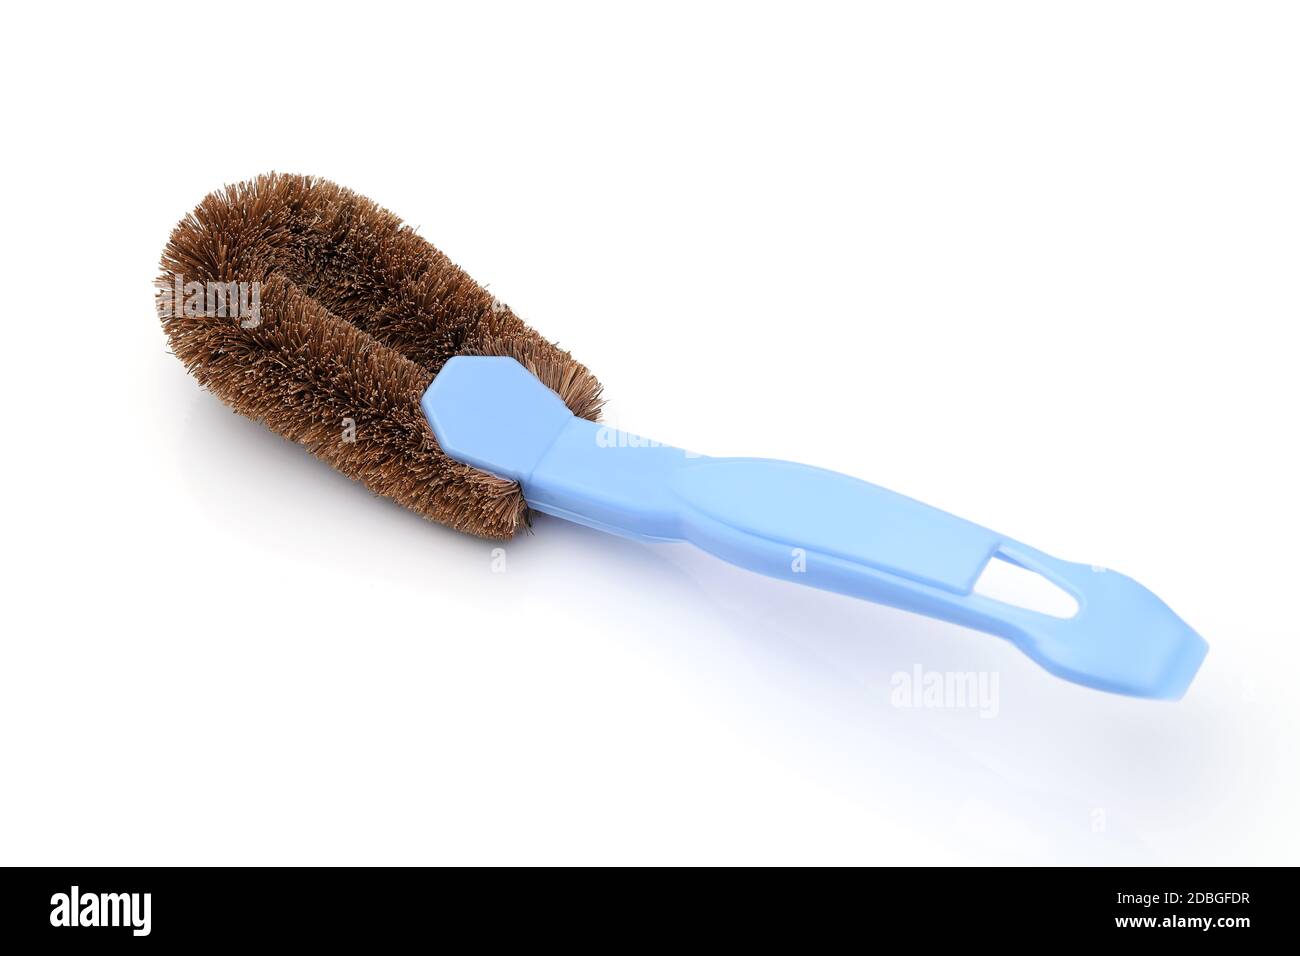 Coconut coir fiber scrubbing brush with handle on white background Stock Photo